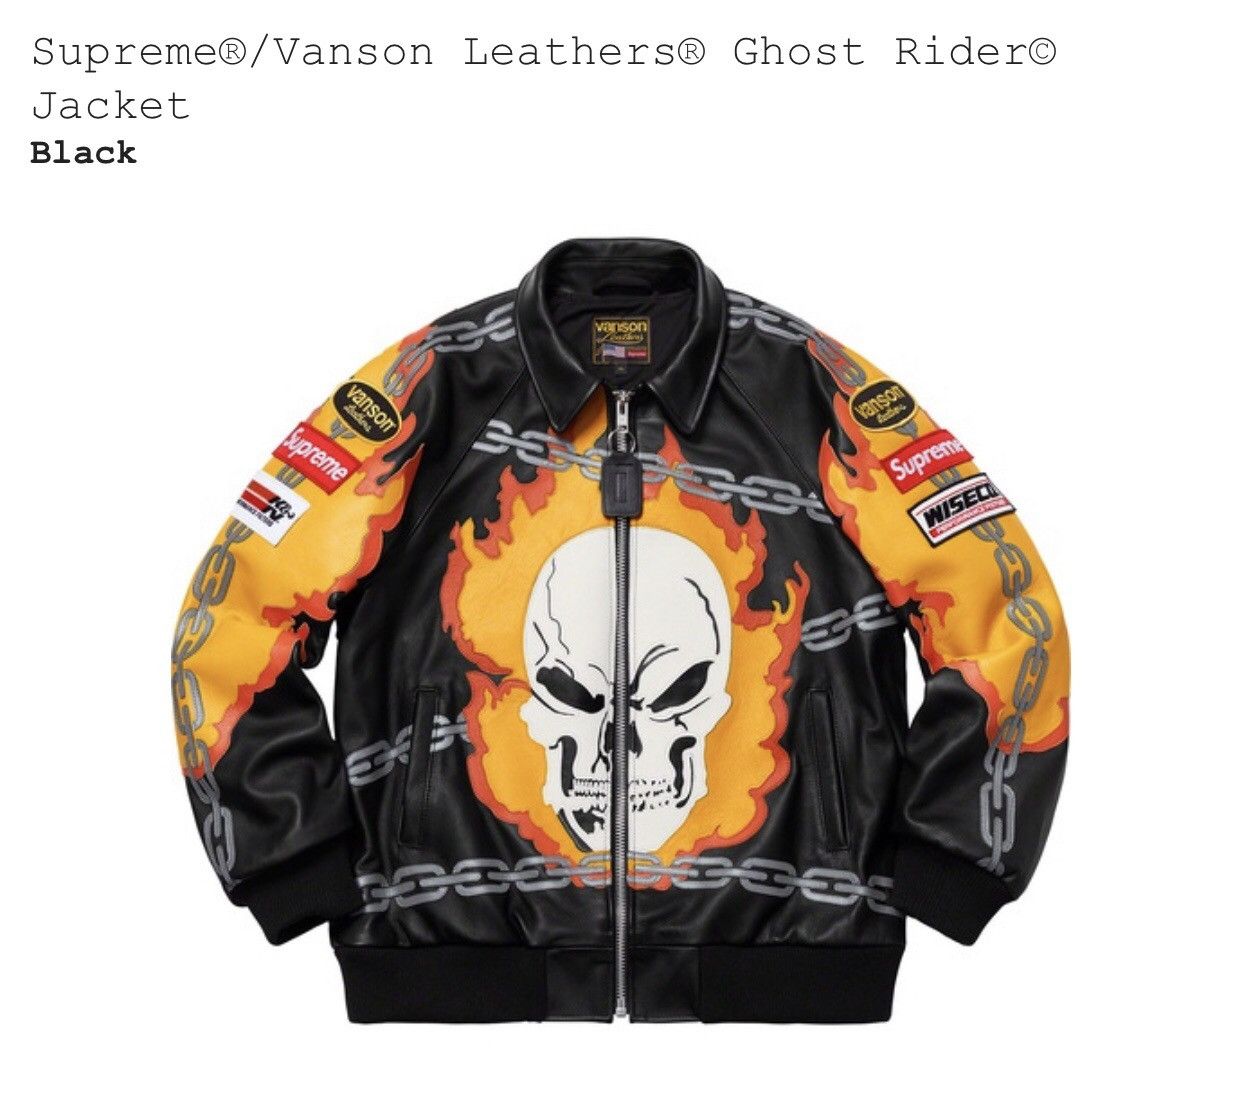 Supreme Vanson Leathers Ghost Rider Jacket | Grailed